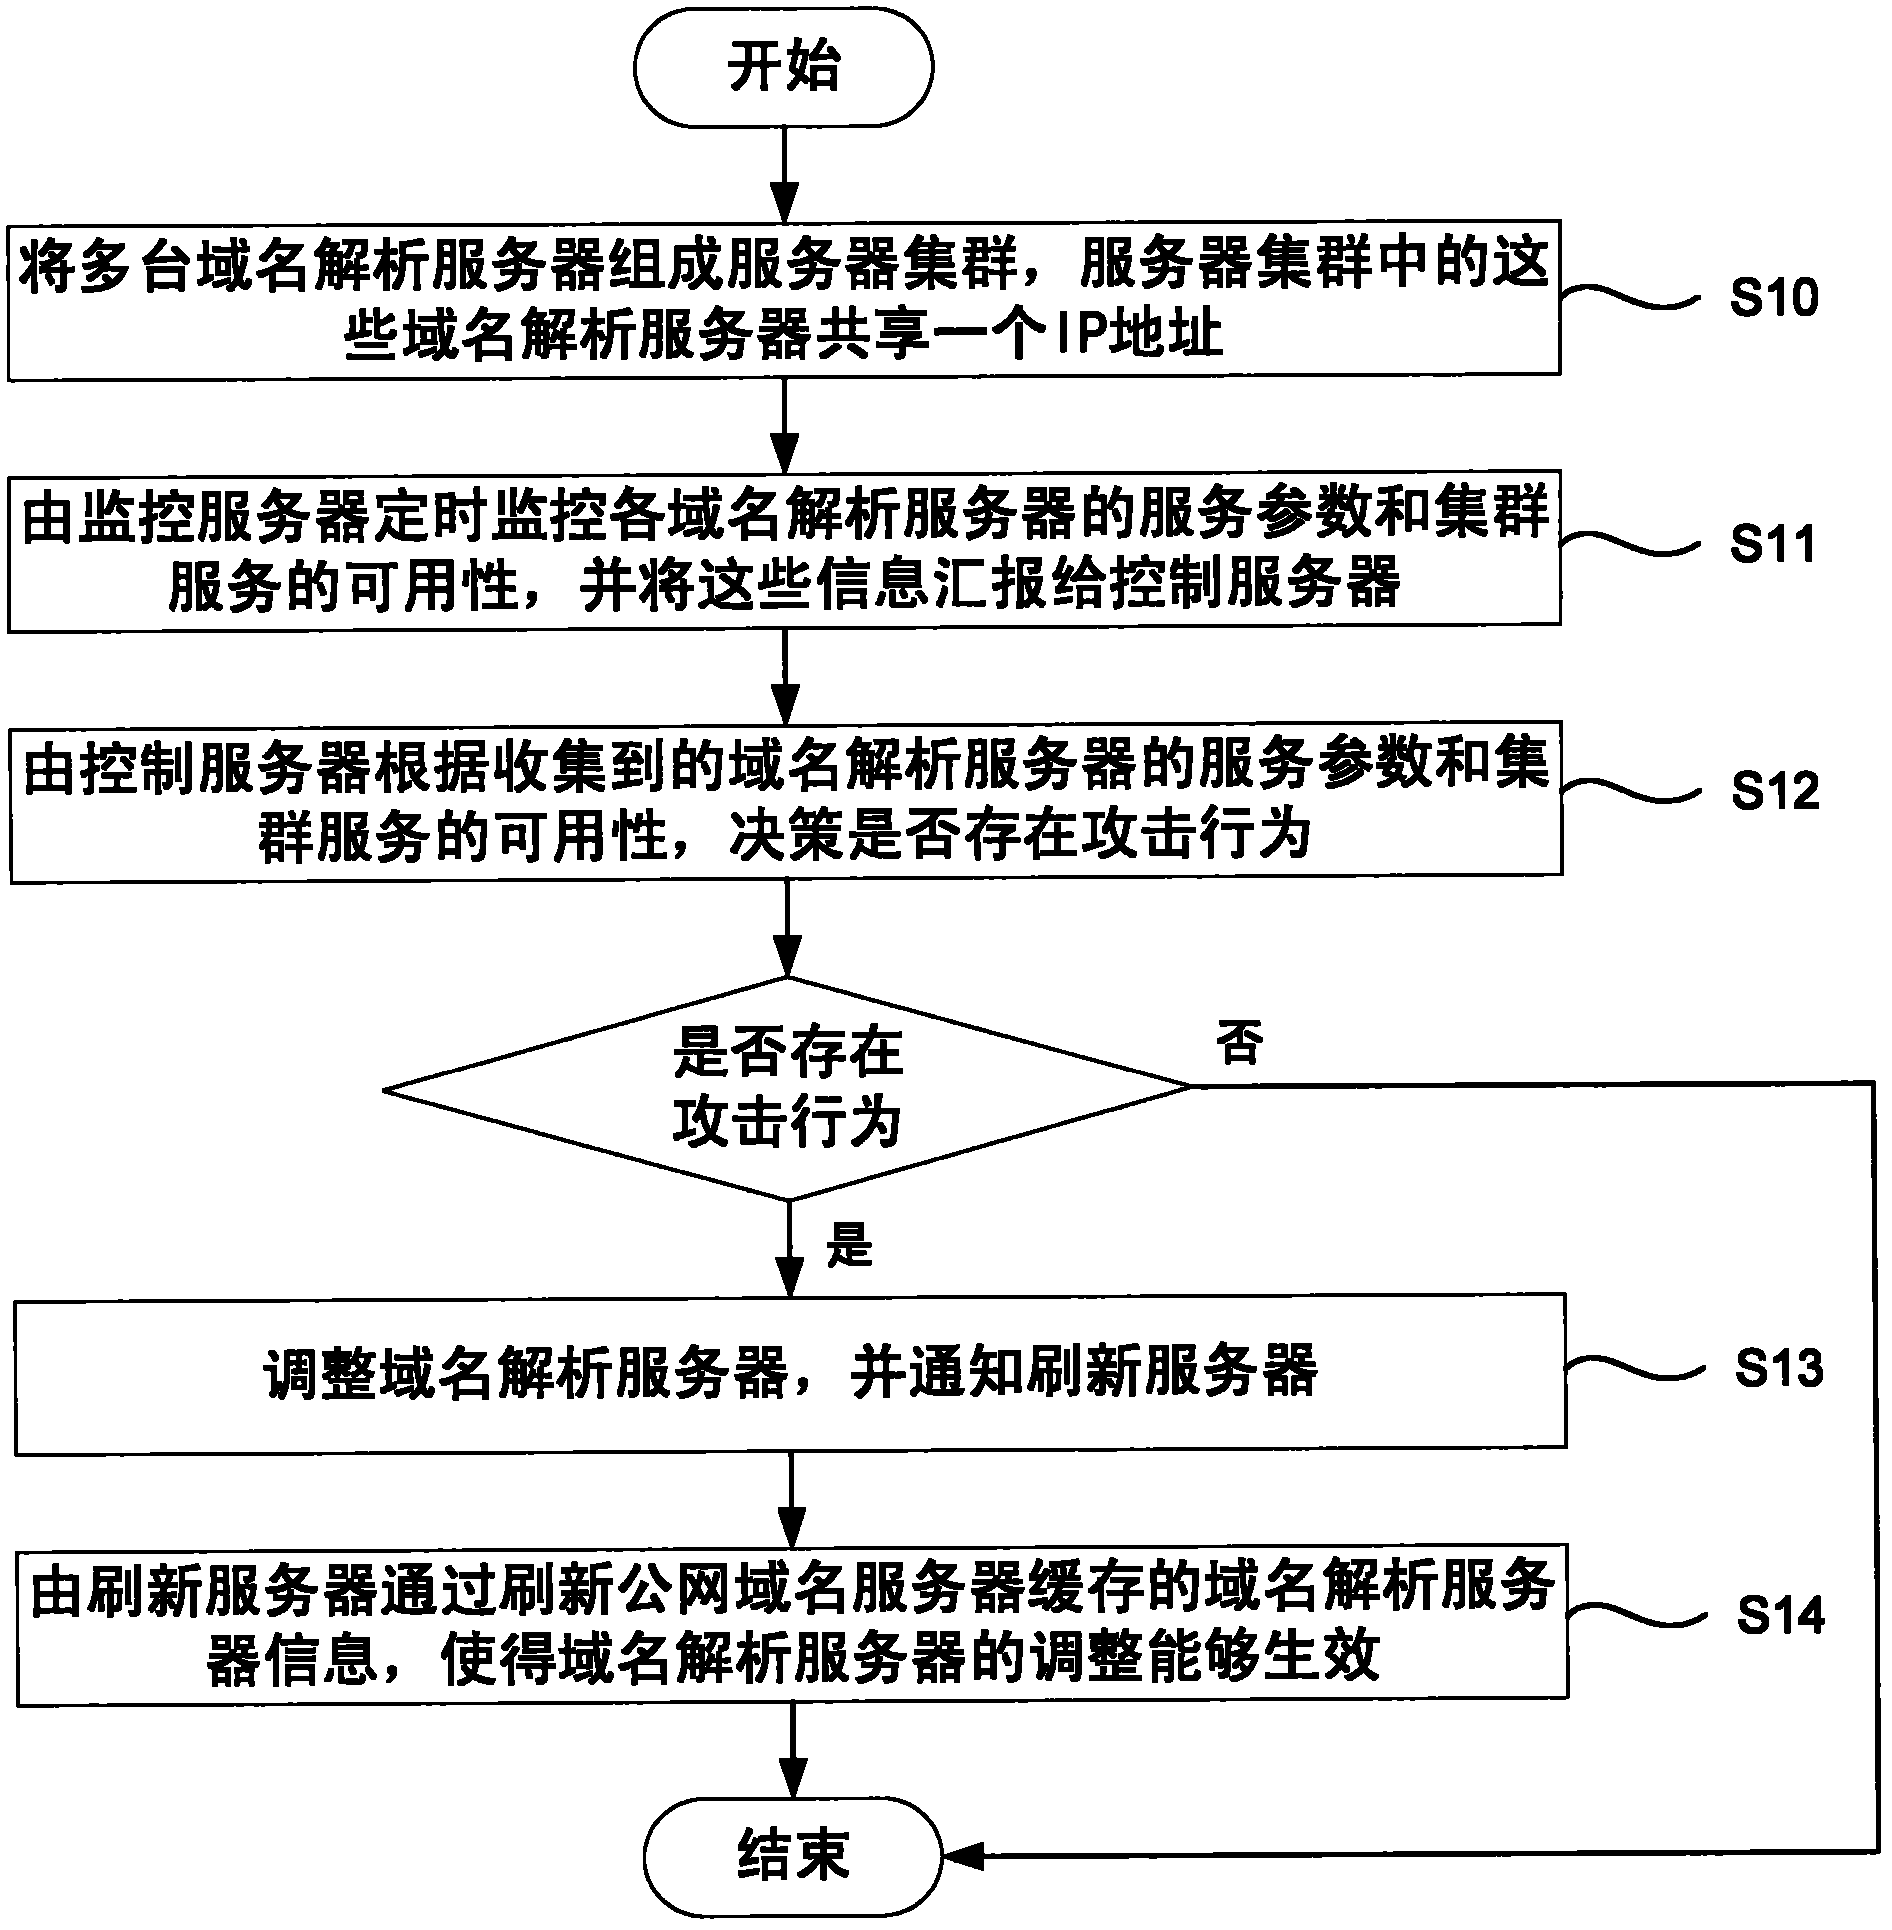 Method and system for domain name resolution server to resist flooding attacks of DNS (Domain Name System) request reports